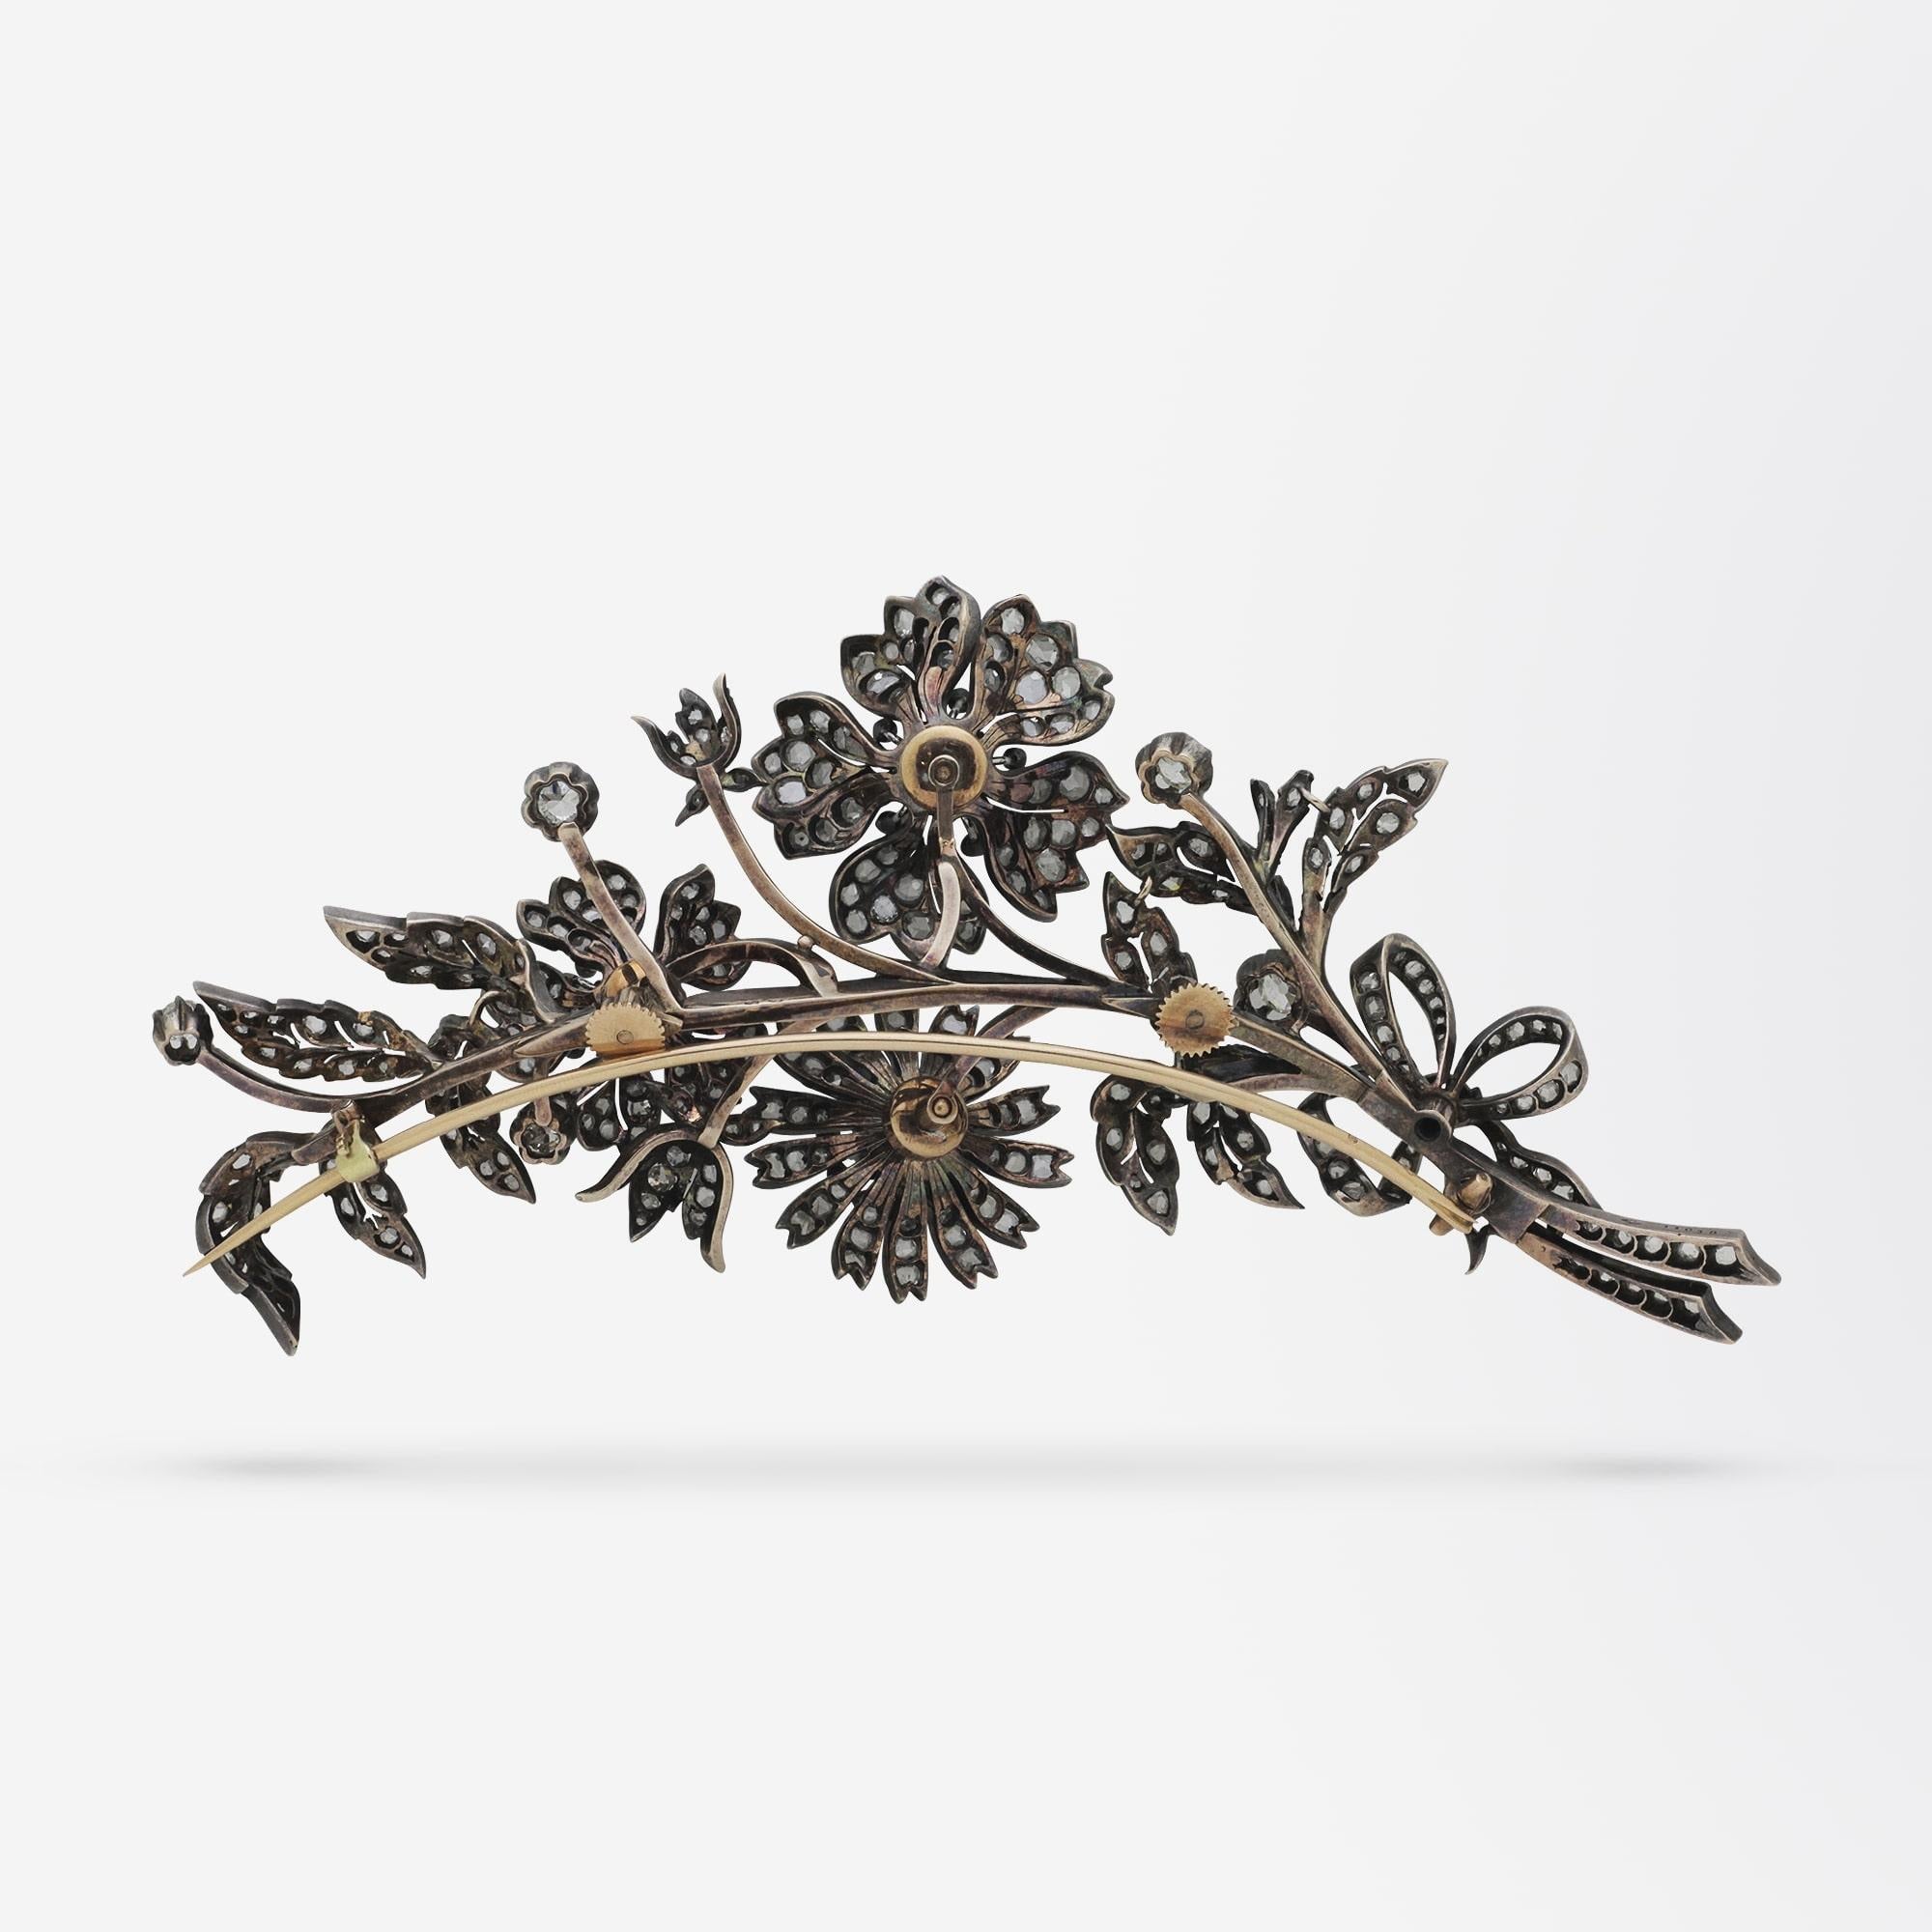 An exceptional French, floral spray 'en tremblant' brooch pin. This 18 karat gold piece comprises of several components which screw together to form one large brooch. The piece can be pulled apart to create a smaller spray, likely used as a hair